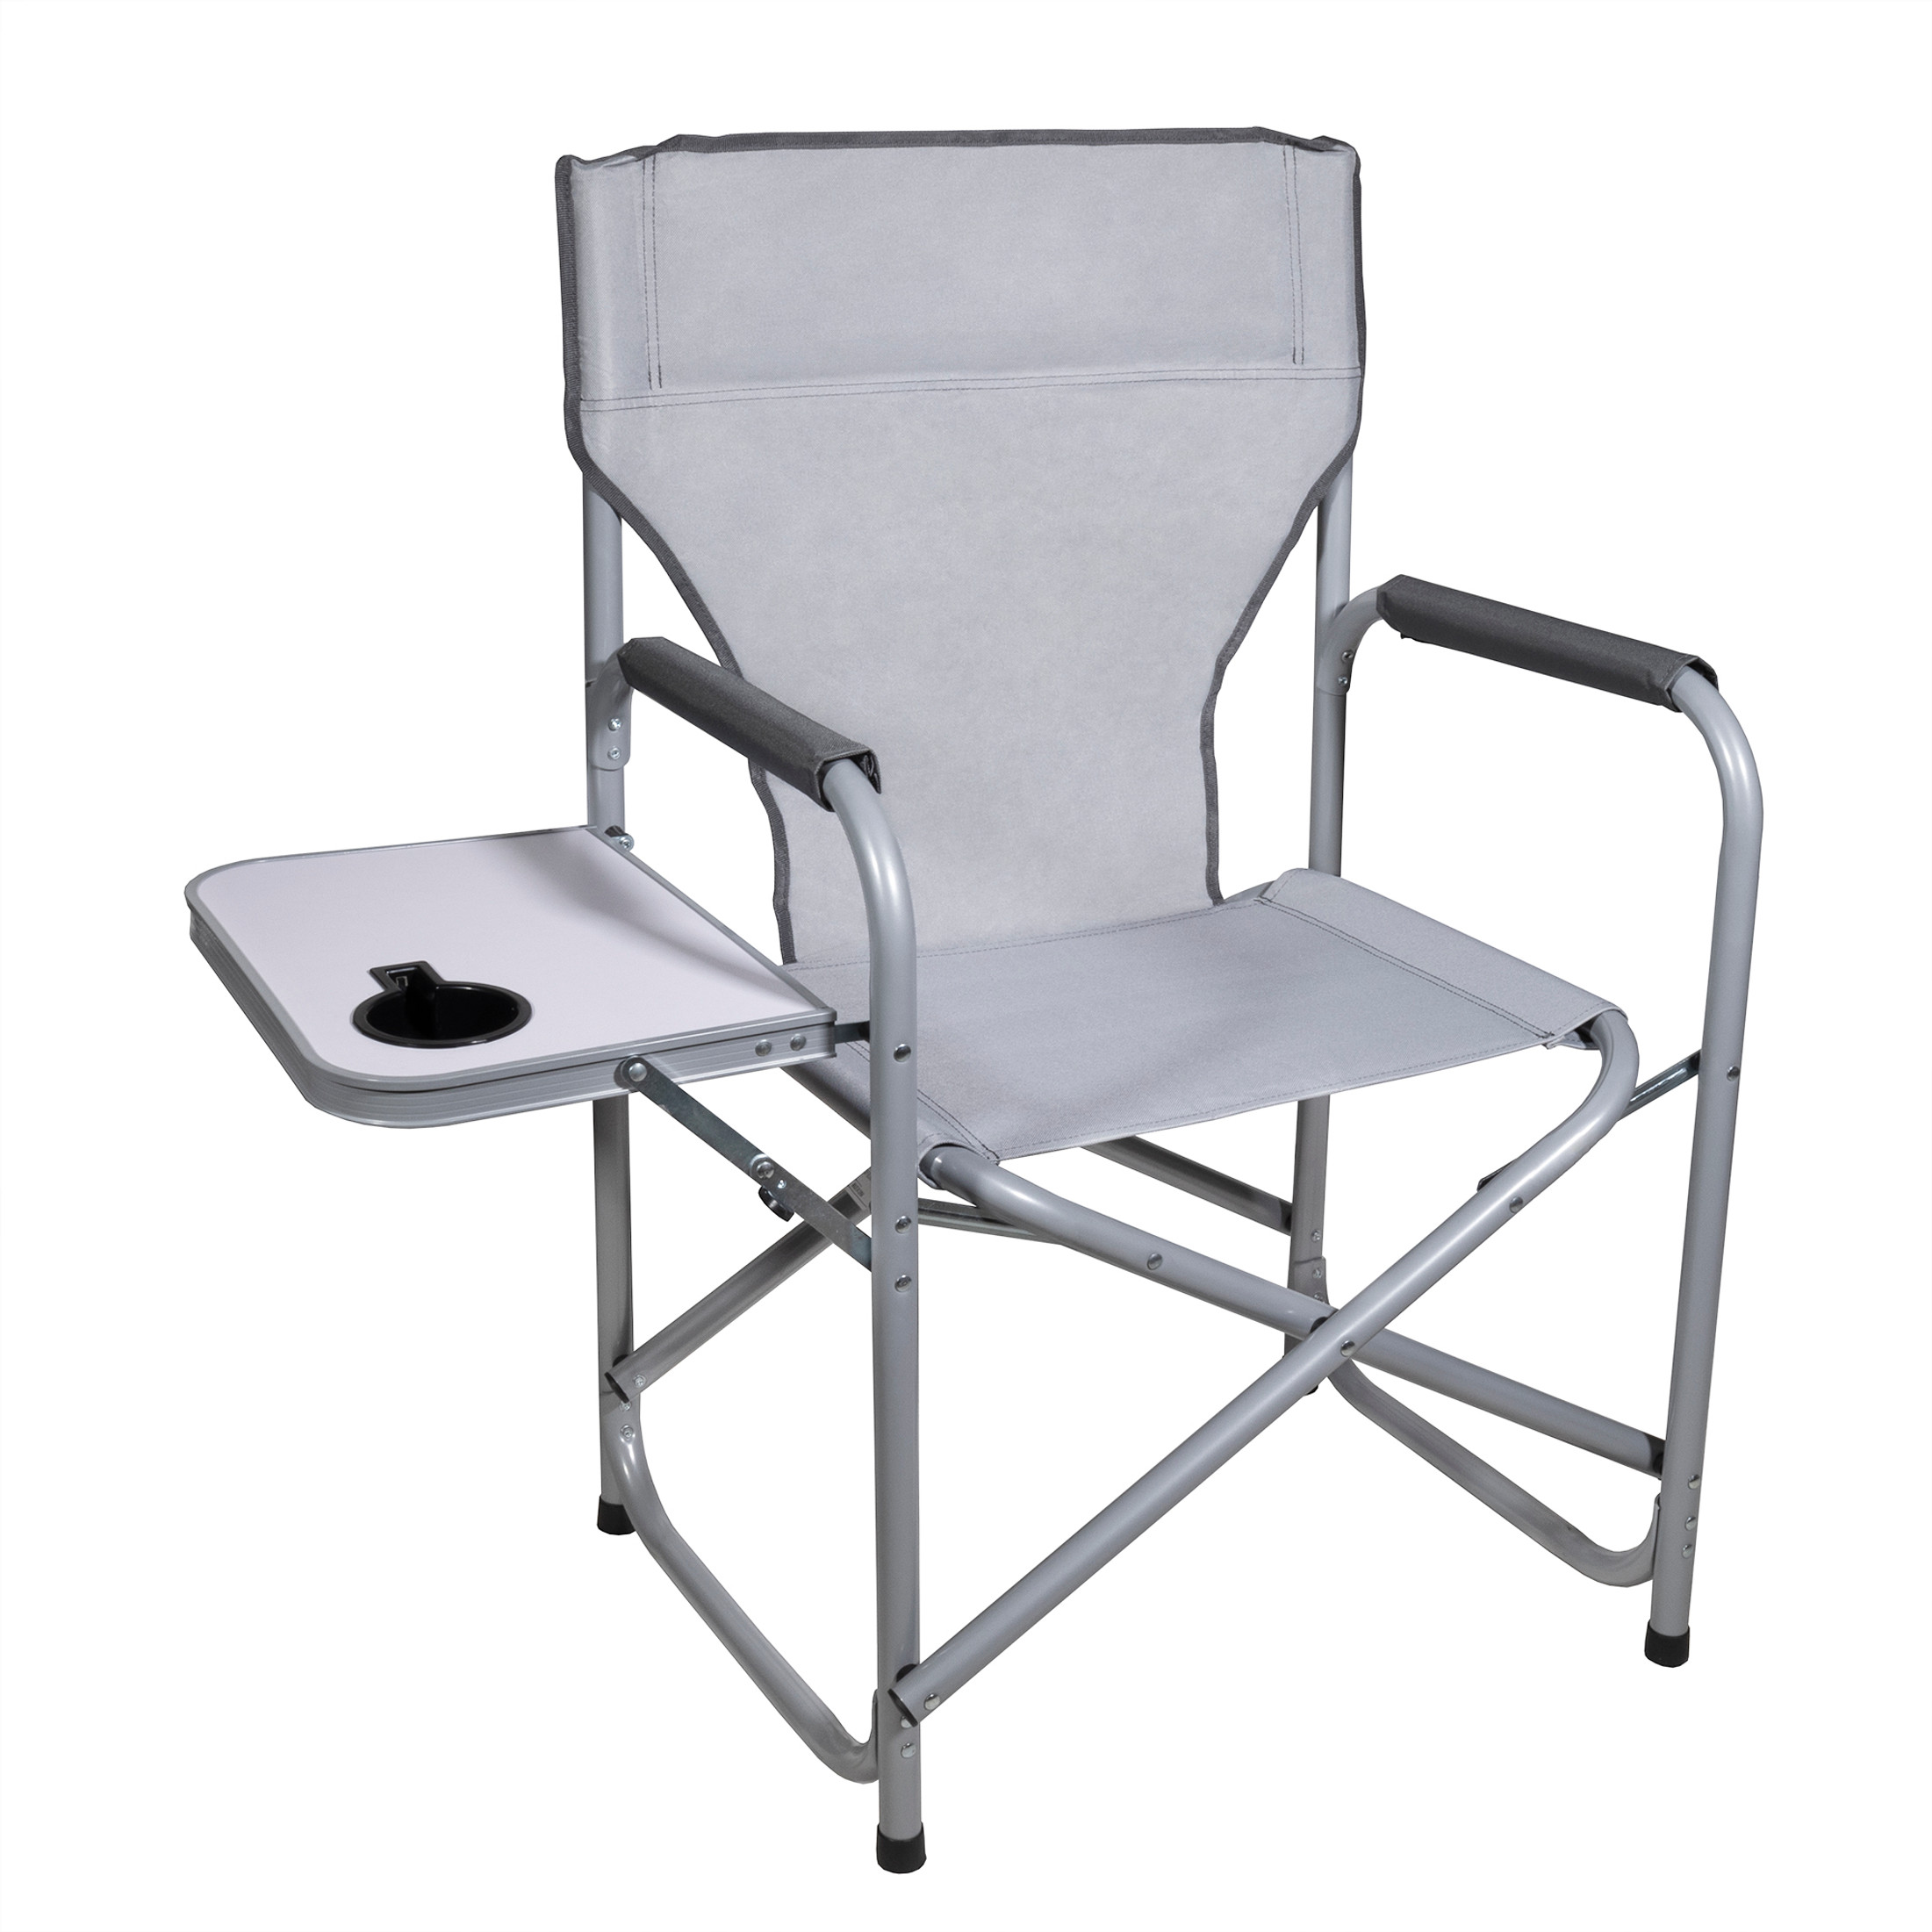 Zenithen Portable Outdoor Directors Folding Chair with Side Table, Gray